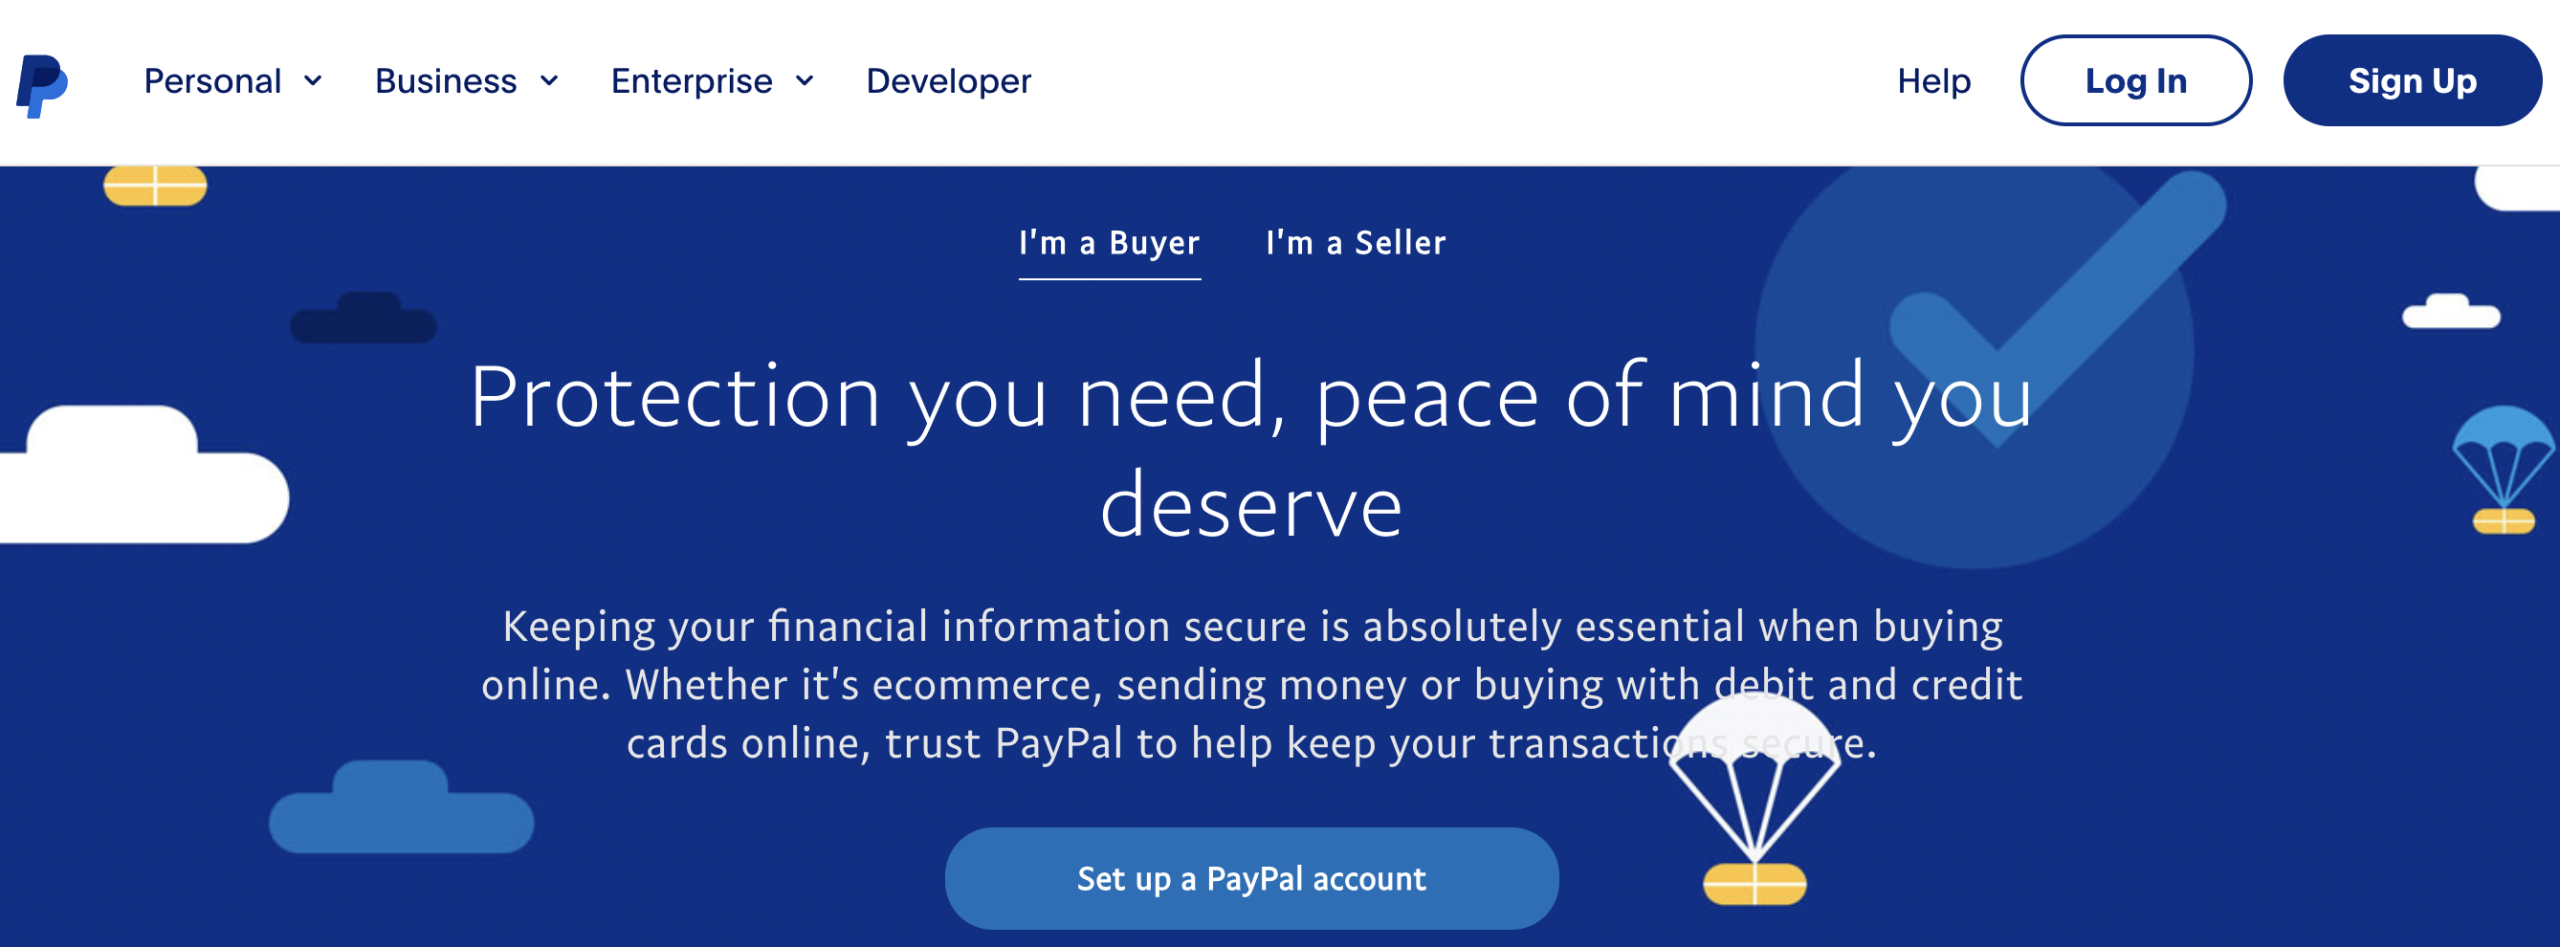 How do I buy Cryptocurrency on PayPal? | PayPal GB